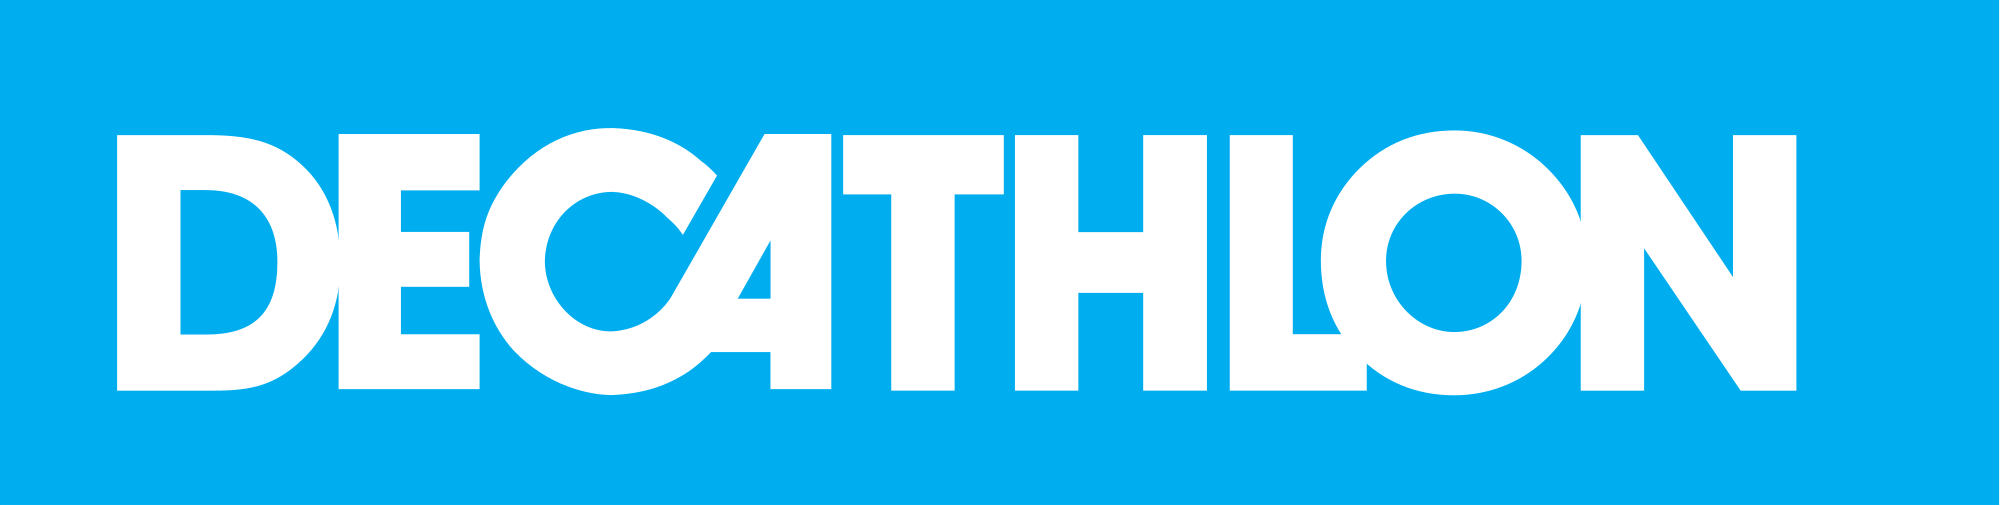 Logo of Decathlon, the largest sporting goods retailer in the world